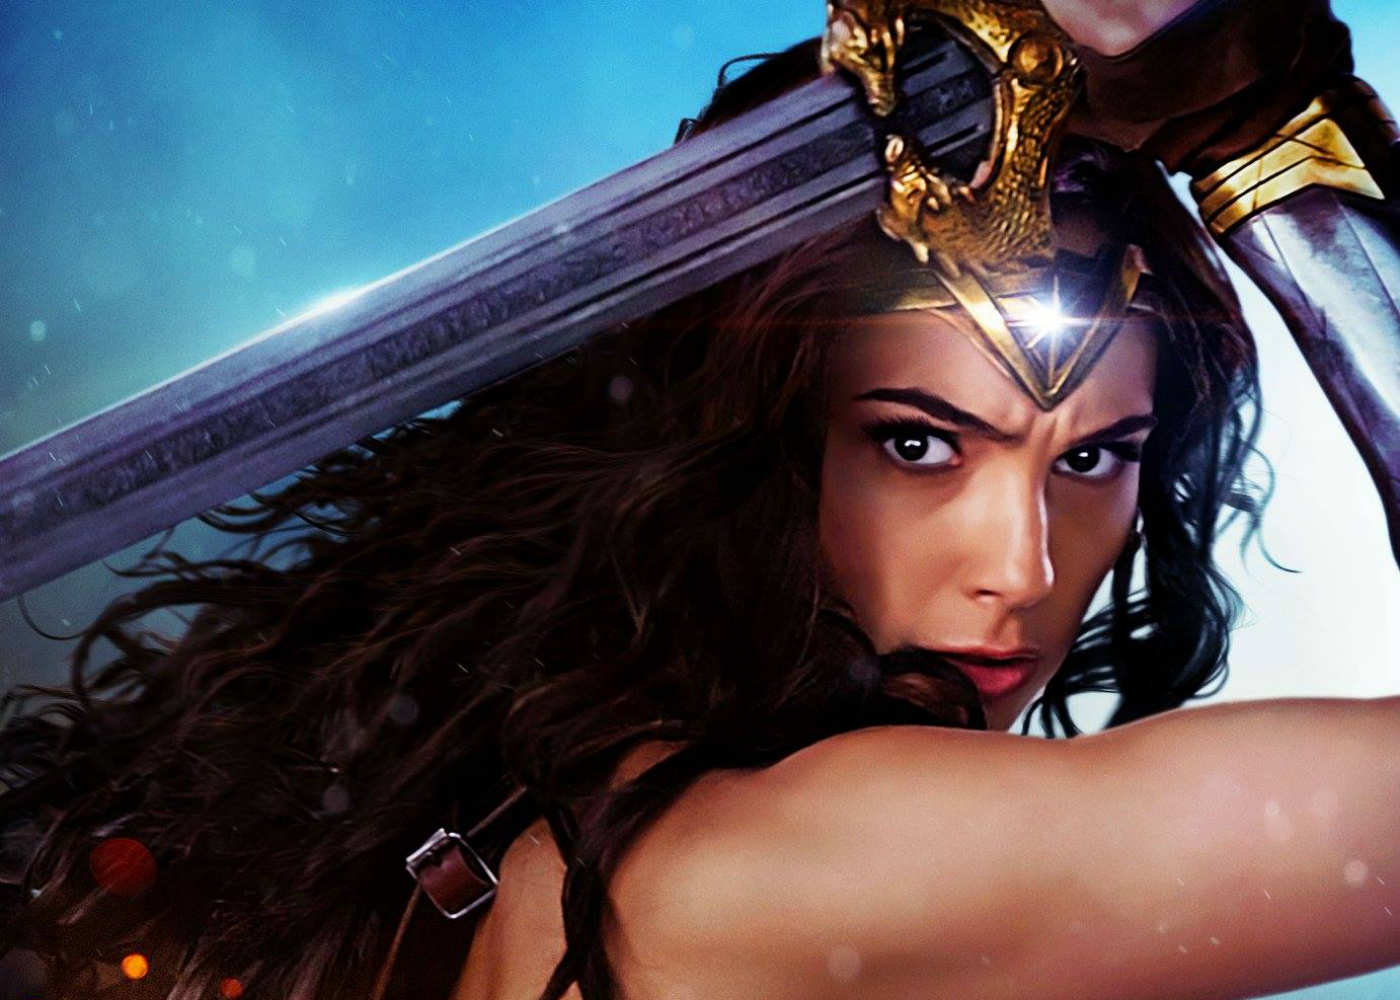 Wonder Woman Director Patty Jenkins Throws Shade at WB’s HBO Max Release Model